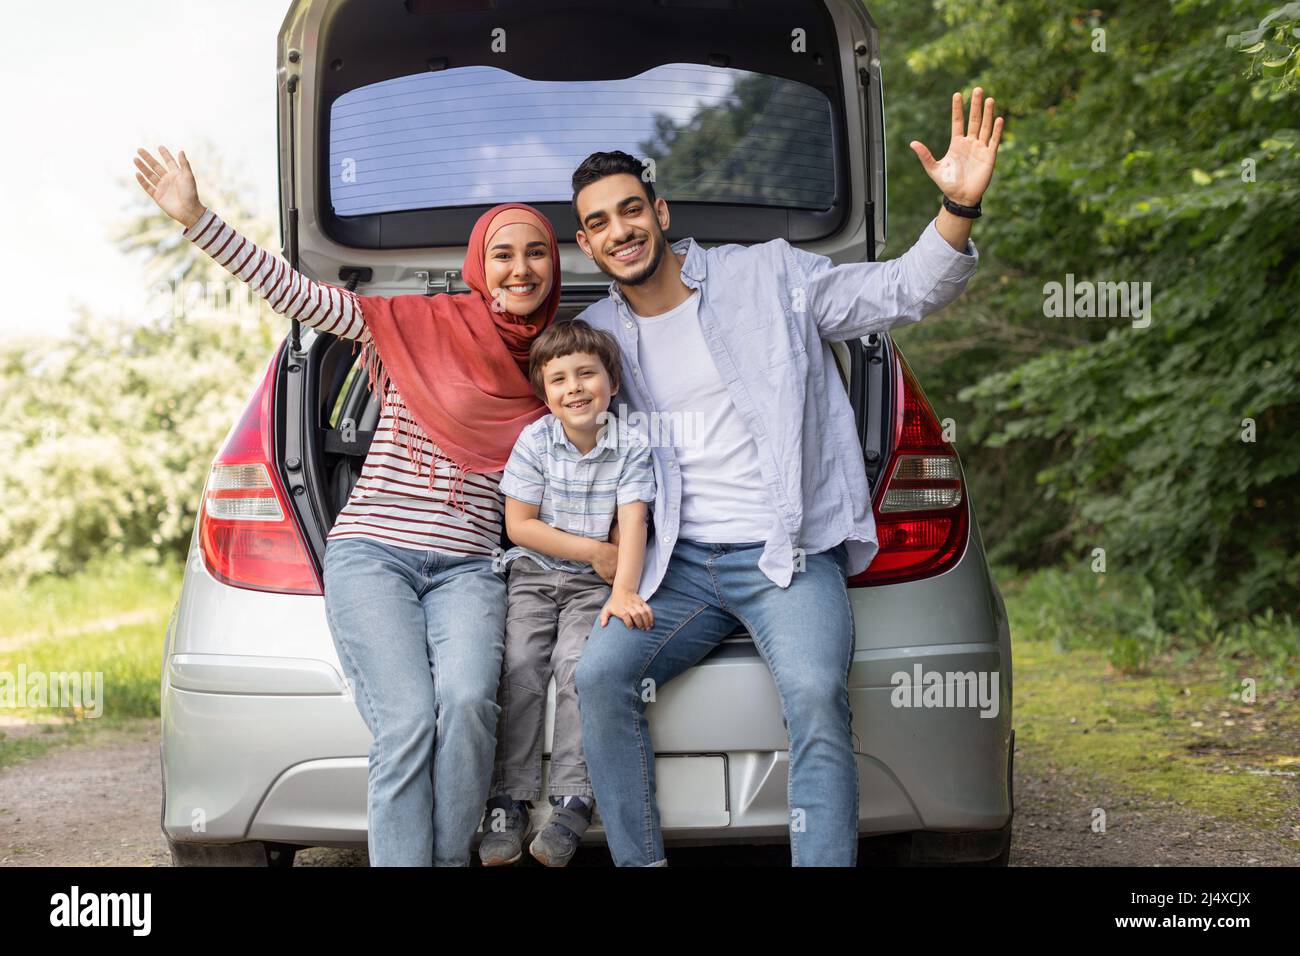 Satisfied millennial arab husband, wife in hijab and small boy waving hands sitting in car trunk Stock Photo